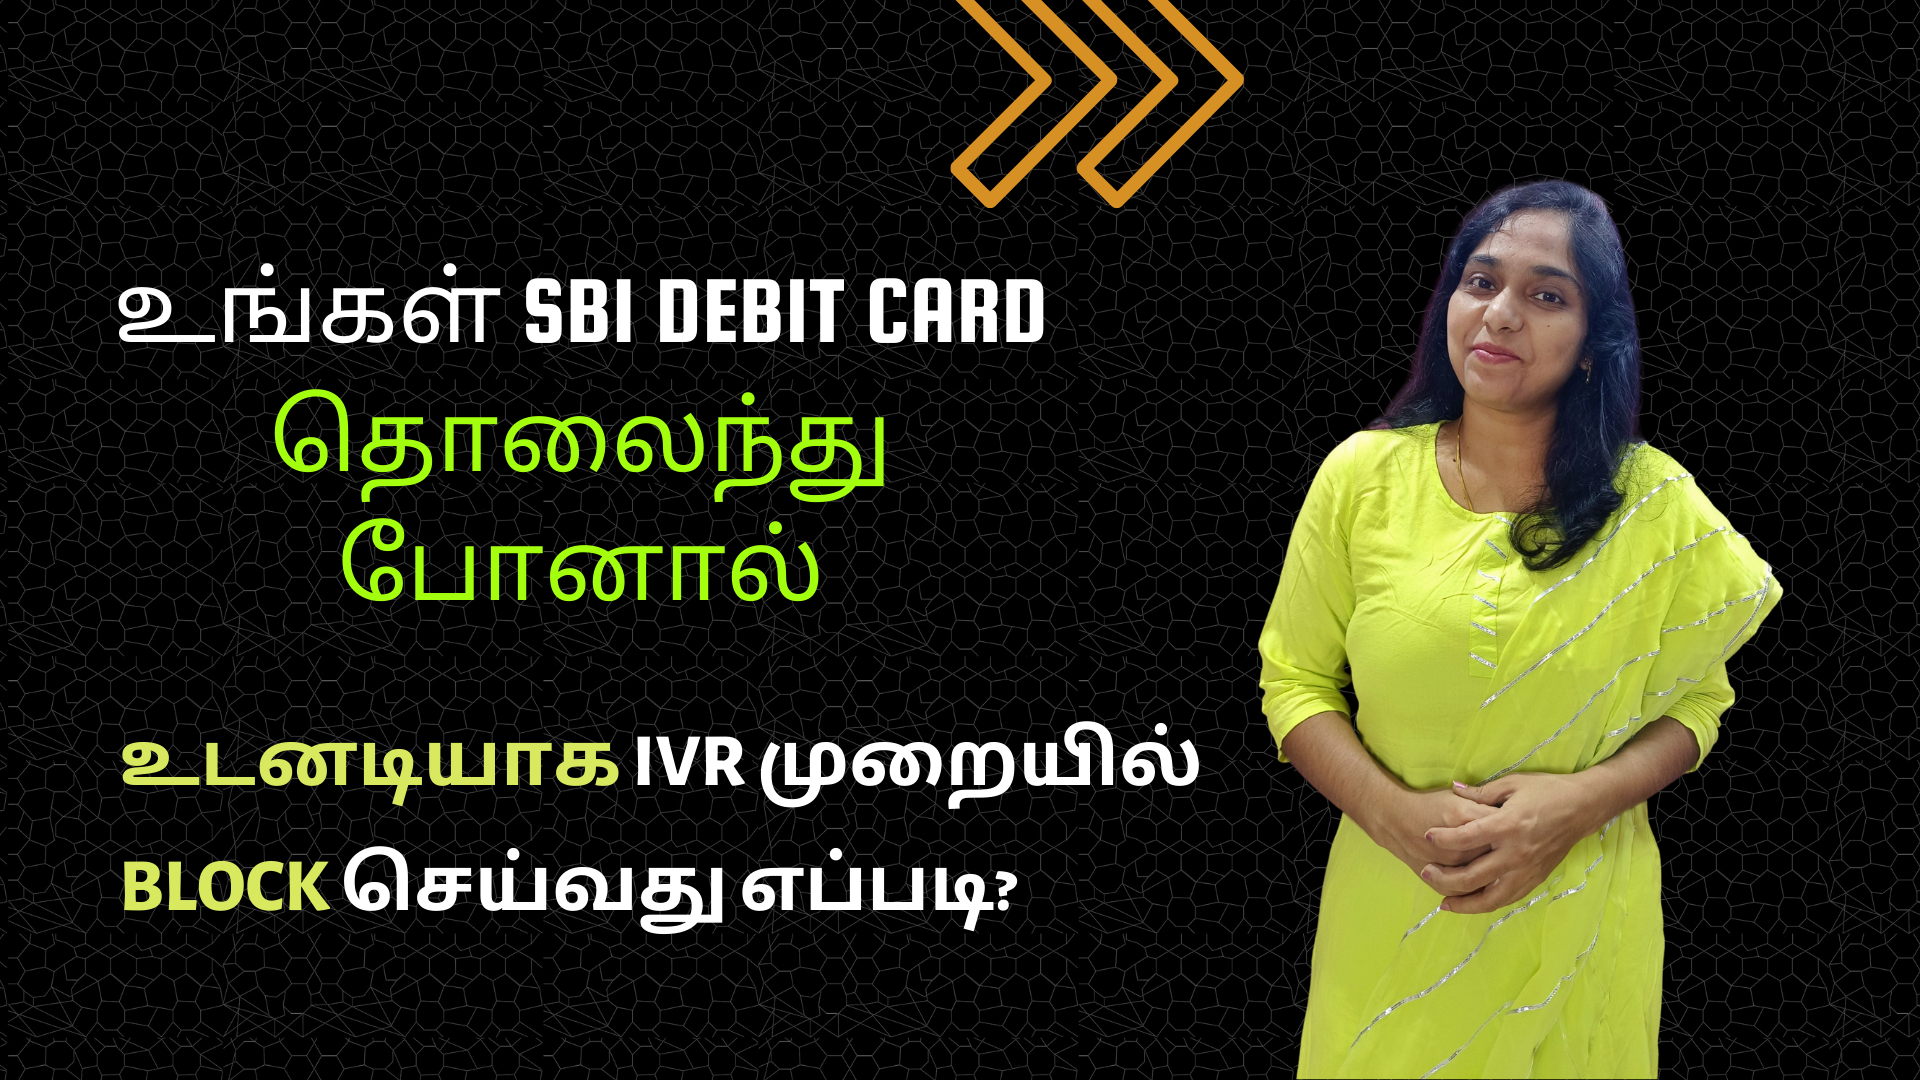 How To Quickly Block SBI Debit Card Using IVR Method? Block ATM Card And Order Replacement Via IVR